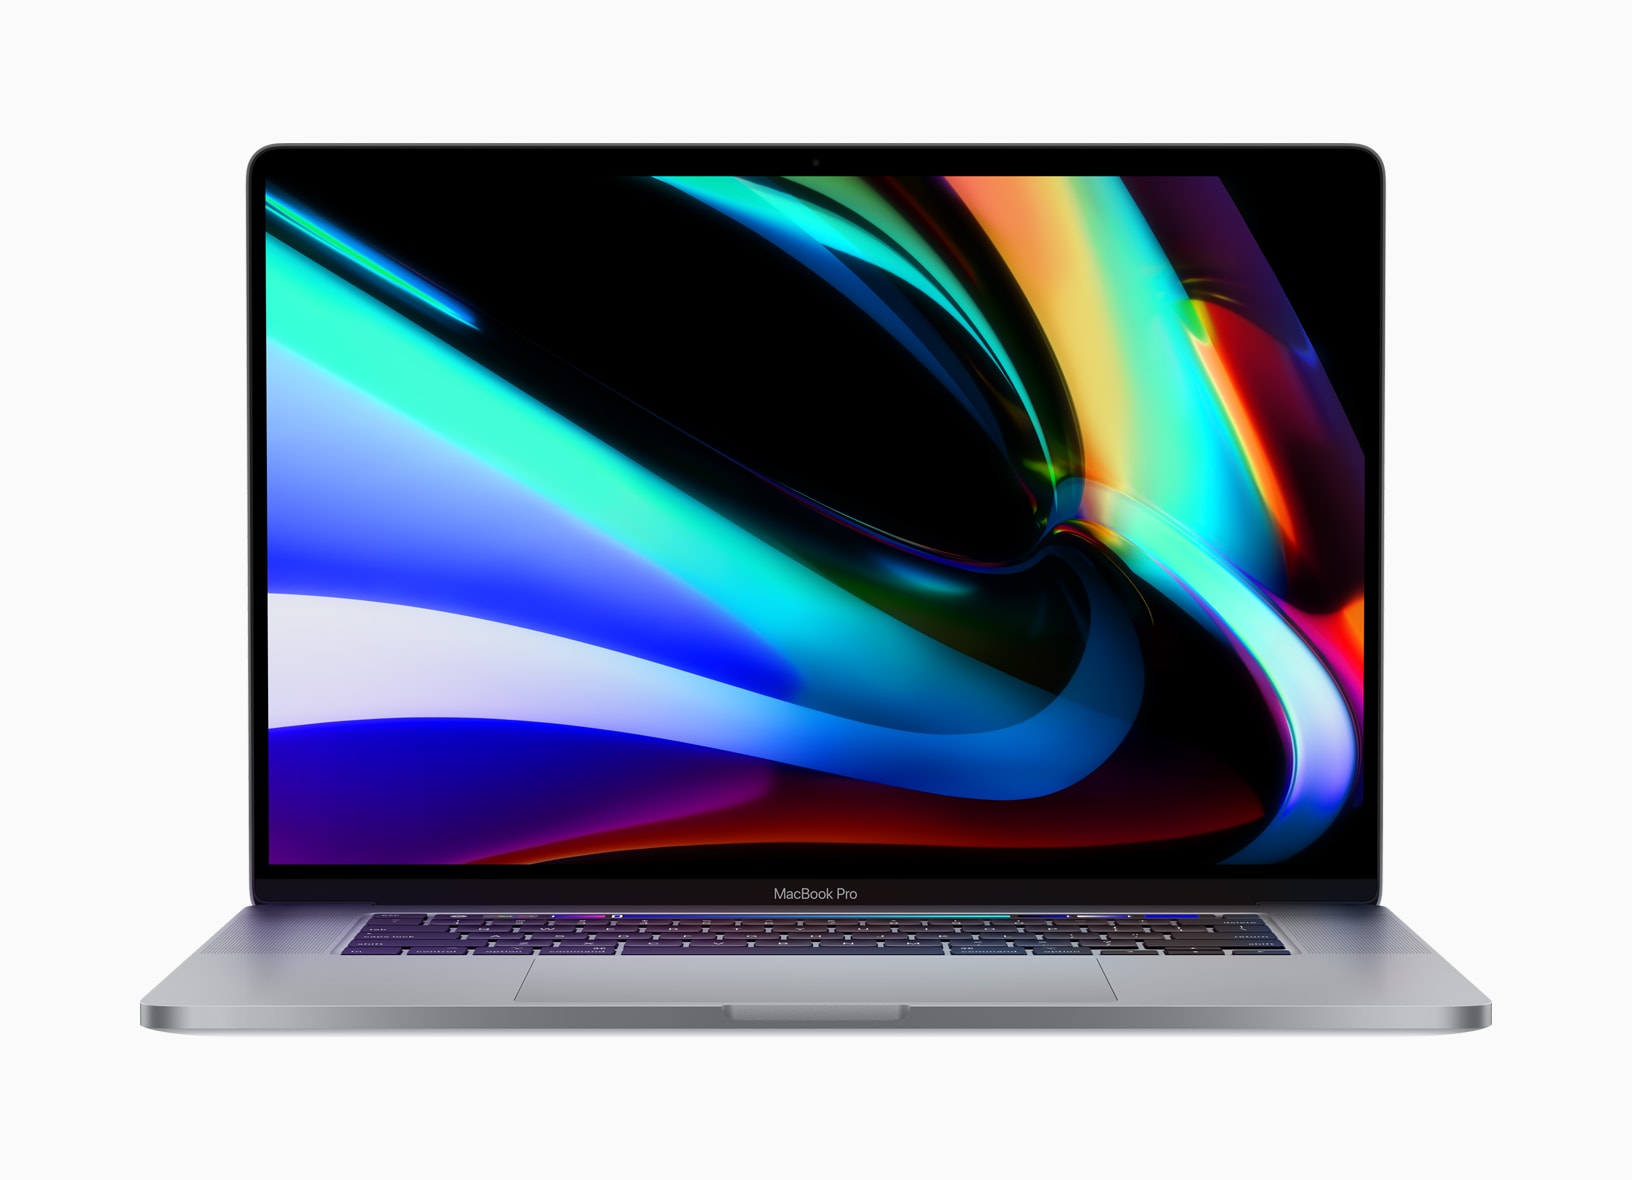 Apple Announces New 16-inch MacBook Pro with Magic Keyboard